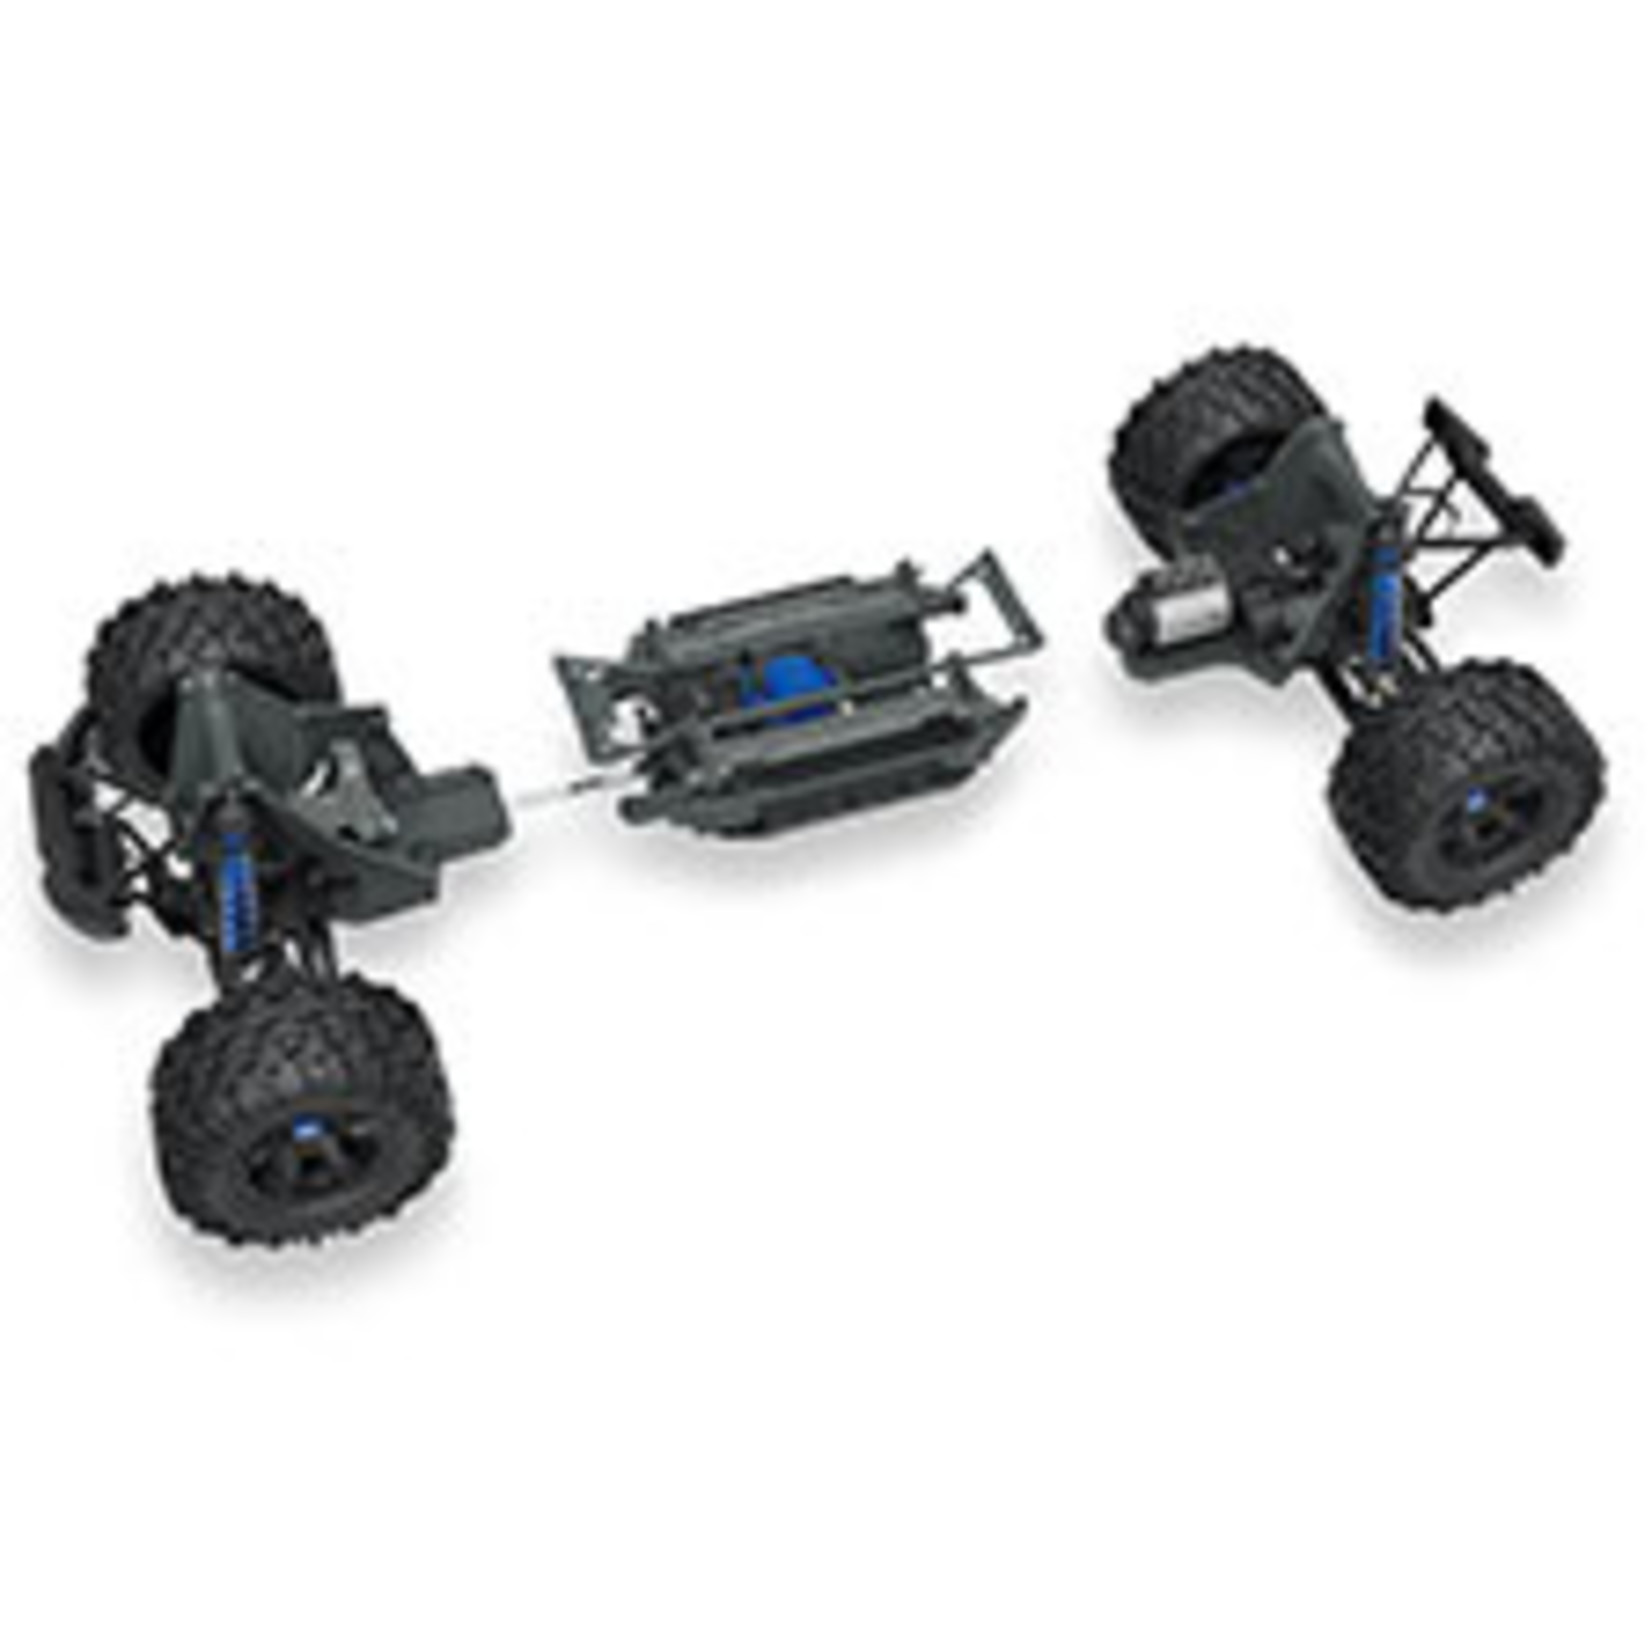 X-Maxx®: Brushless Electric Monster Truck with TQi Traxxas Link 